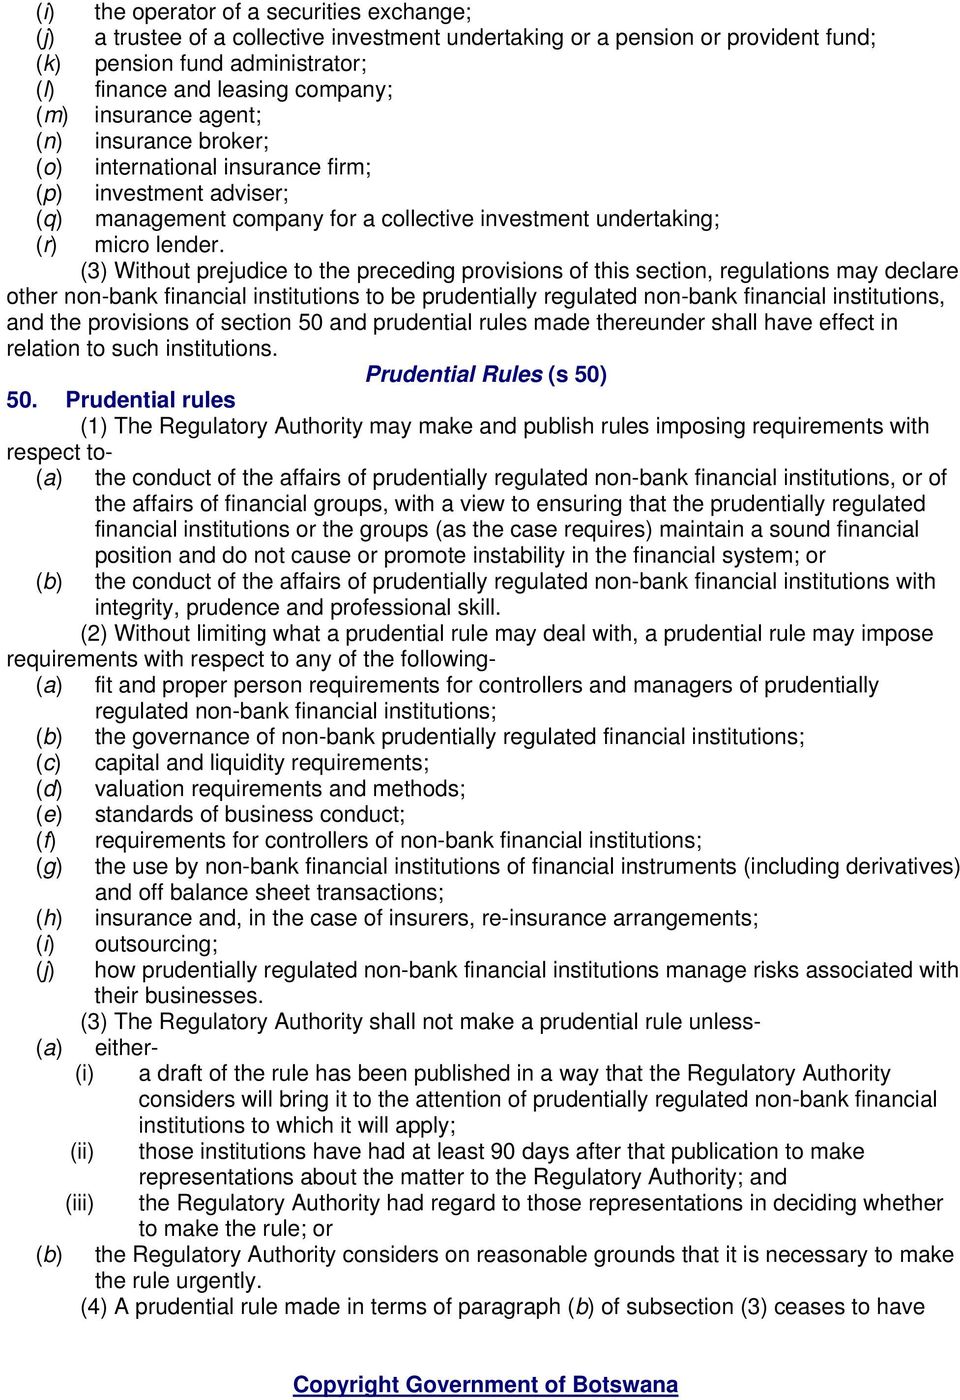 (3) Without prejudice to the preceding provisions of this section, regulations may declare other non-bank financial institutions to be prudentially regulated non-bank financial institutions, and the